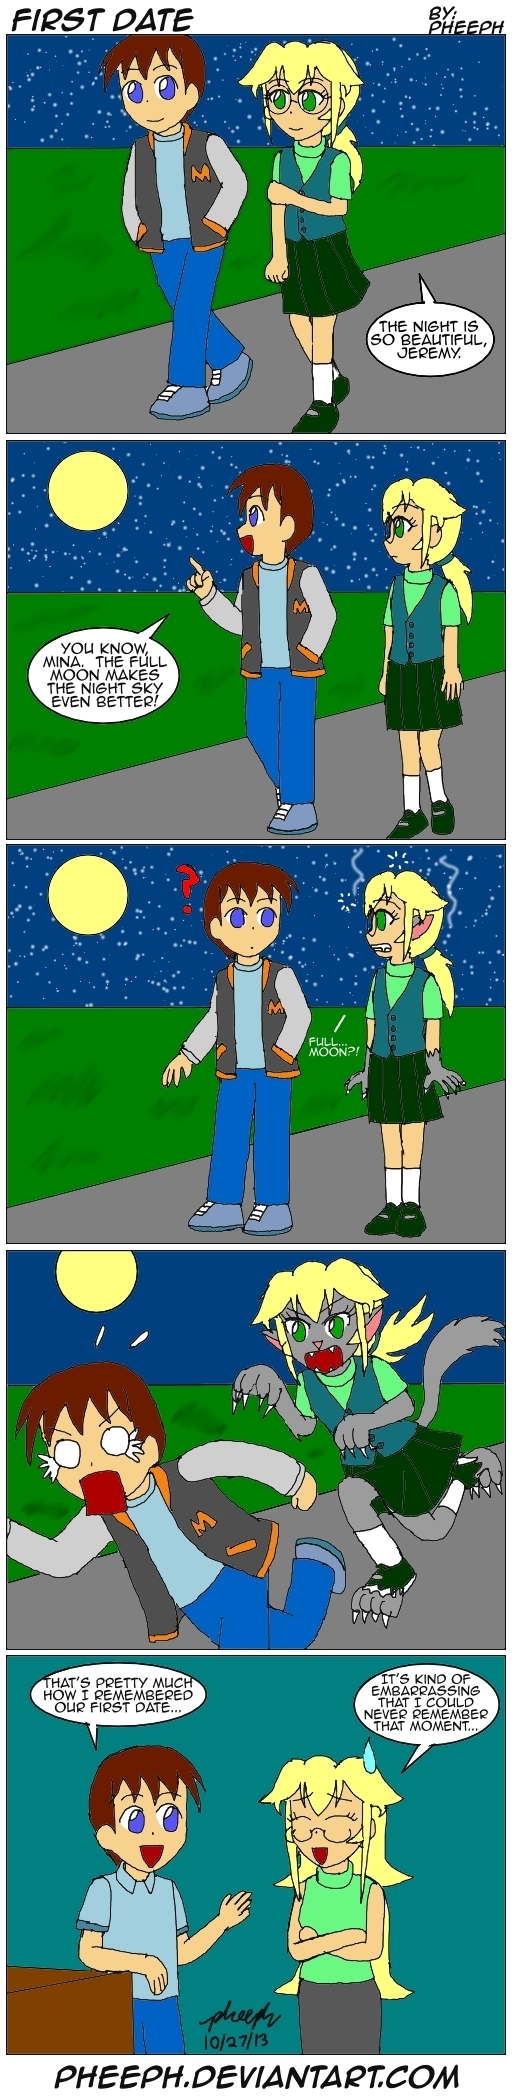 Page 7 - First Date